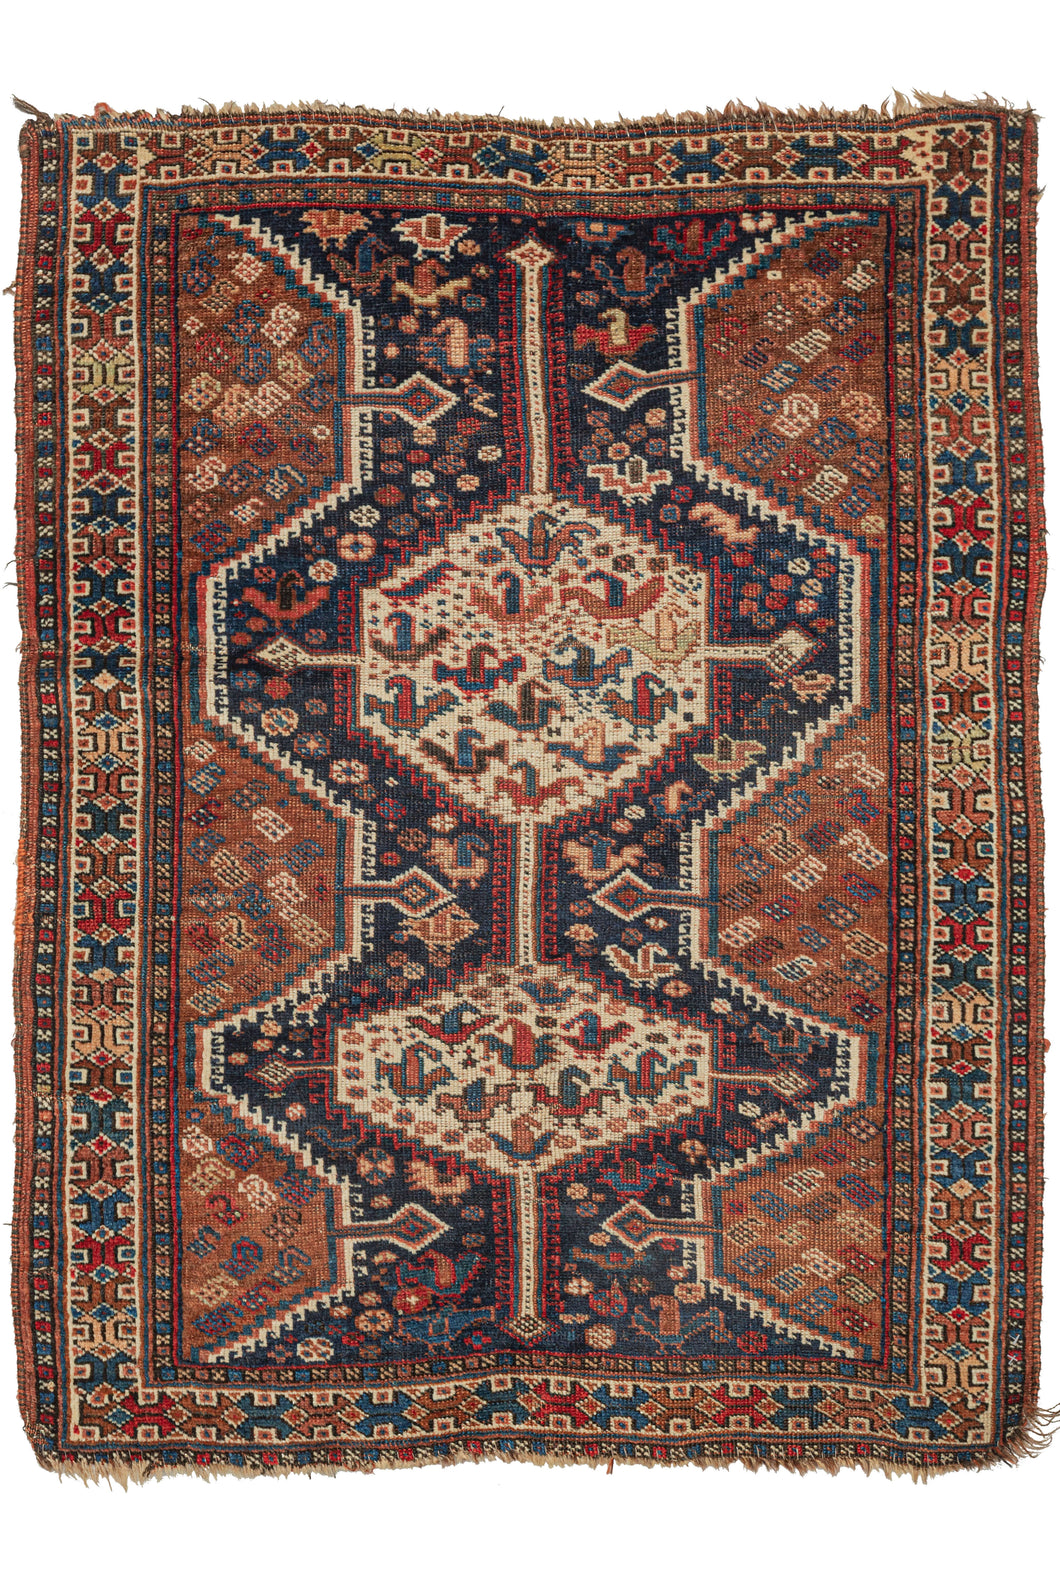 This Antique Khamseh Rug features two connected latch hooked medallions filled with abstracted birds atop a navy of ground chock full of more abstracted birds and rosettes and flanked by two scalloped edges filled with botehs on a rust ground. The whole is nicelhy framed by a bright polychrome border featuring a 